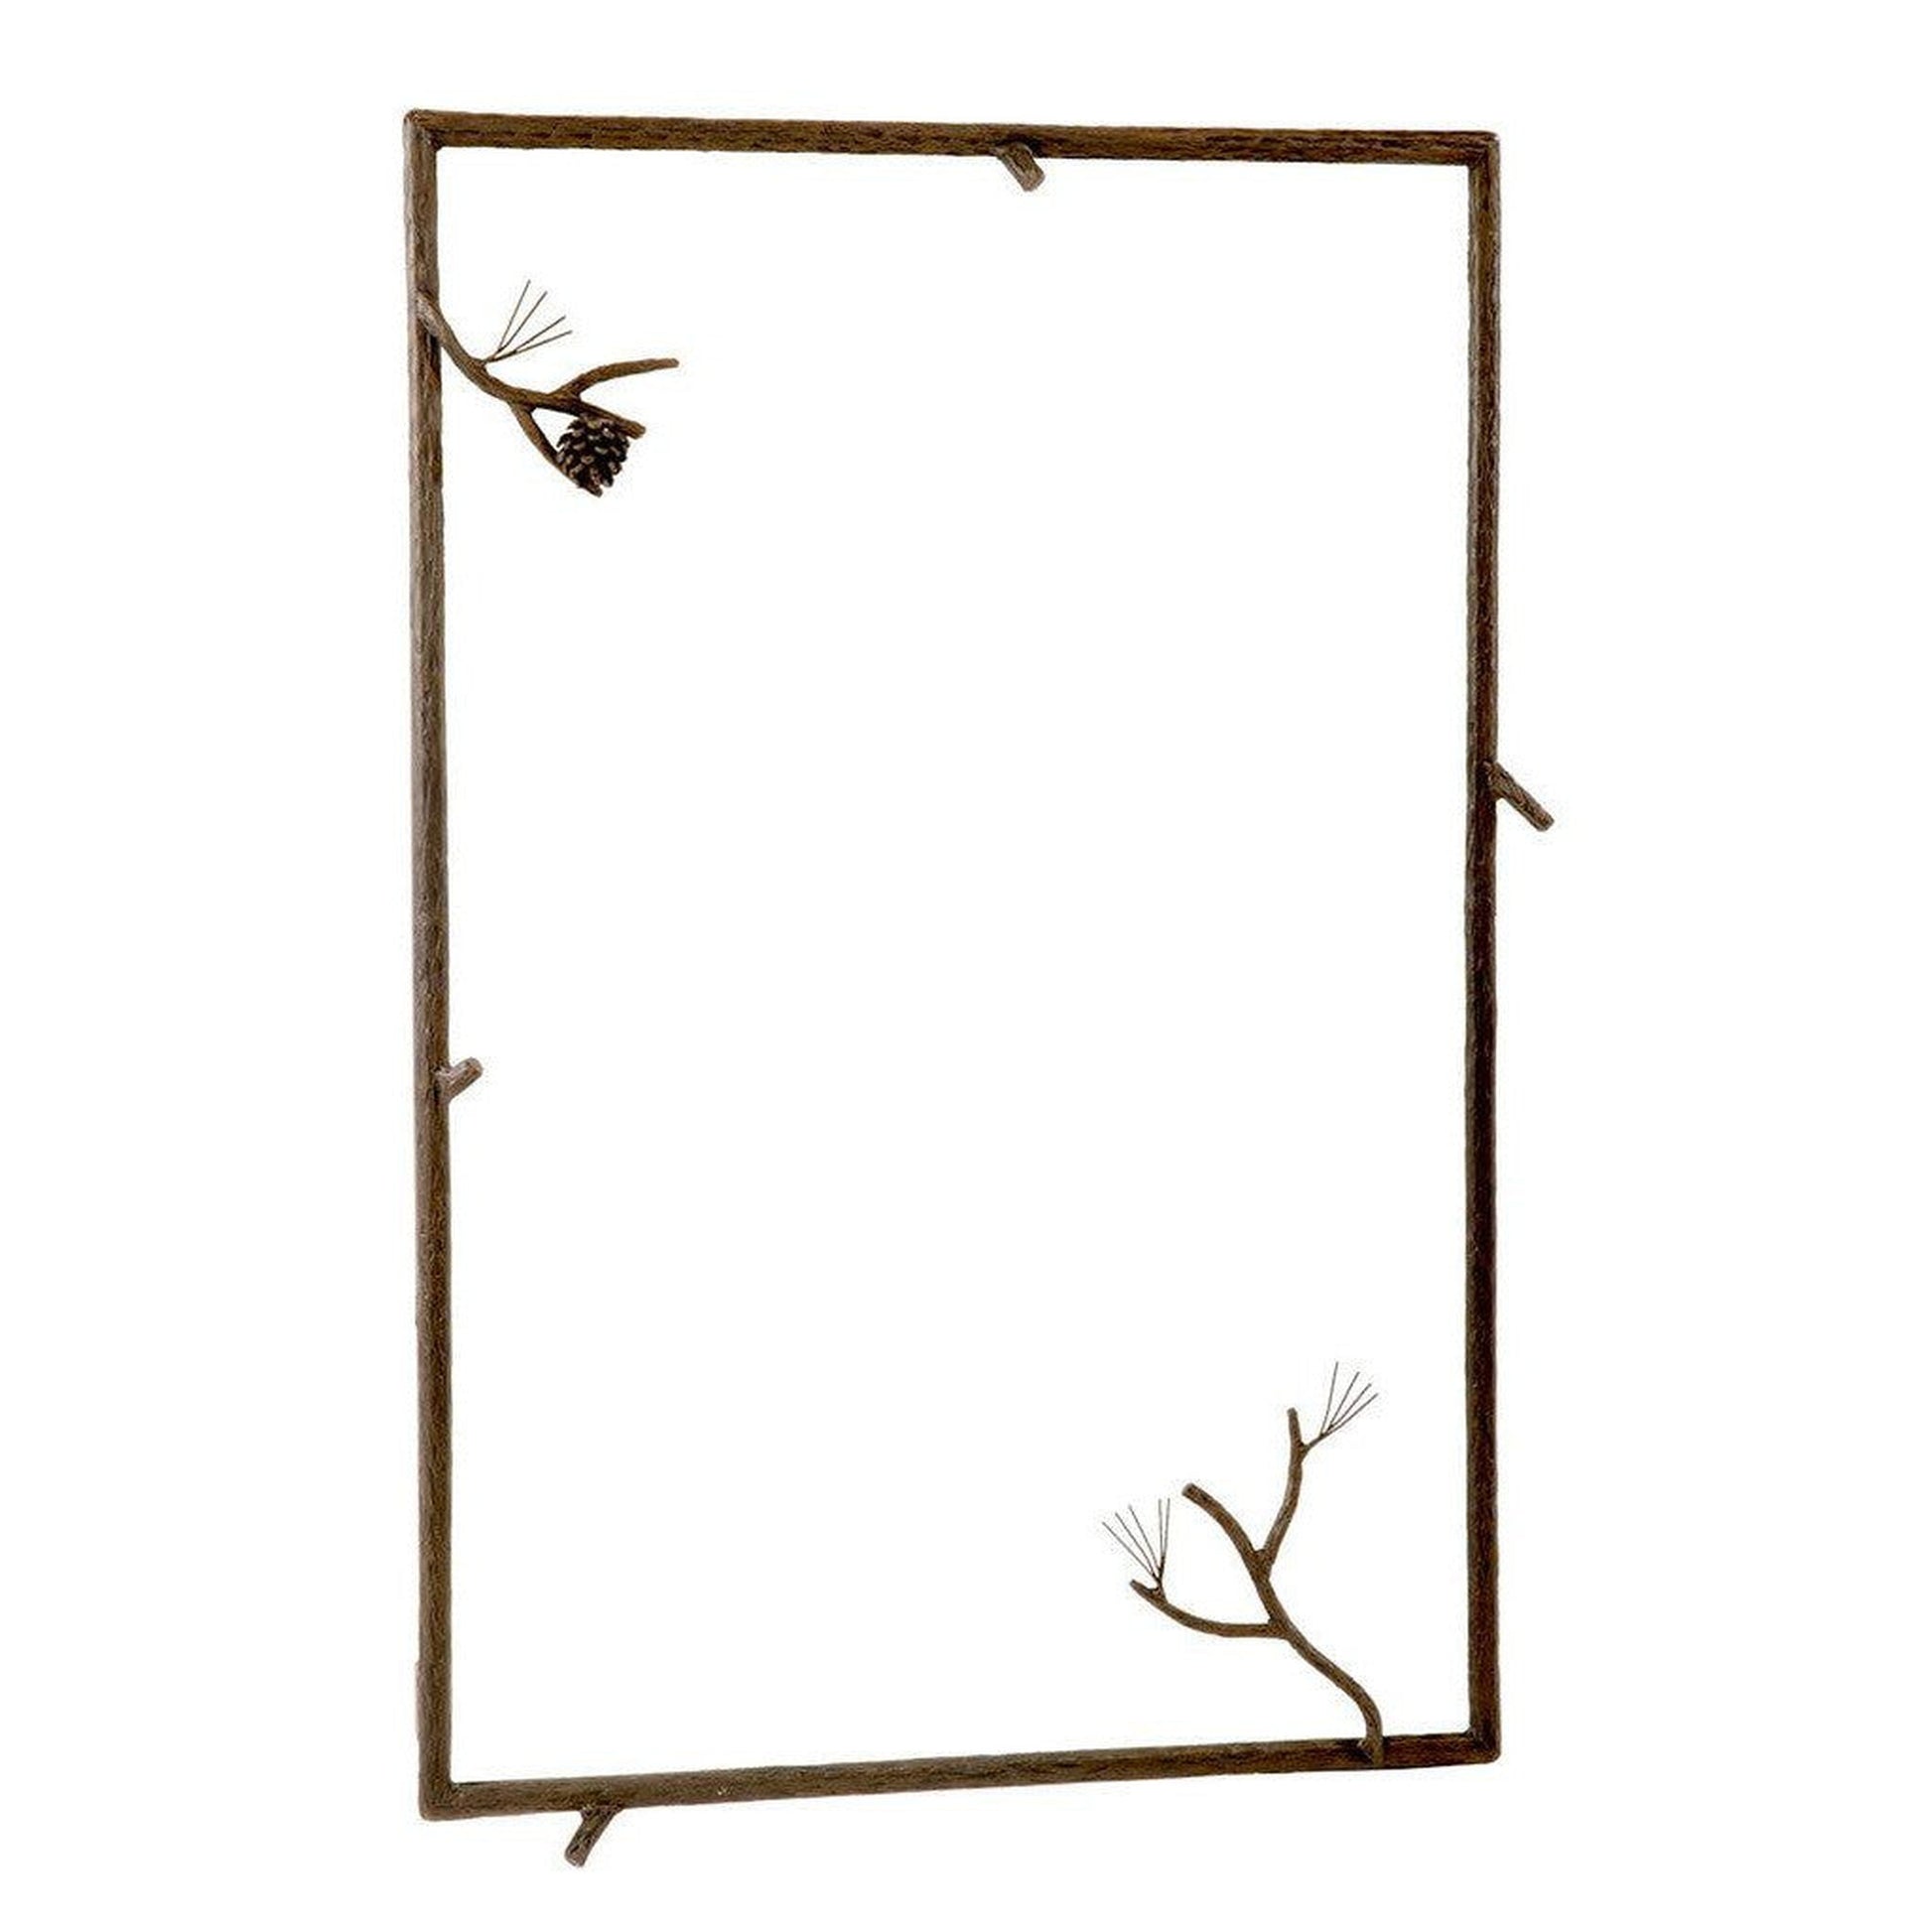 Stone County Ironworks Pine 25" x 21" Small Natural Black Iron Wall Mirror With Gold Iron Accent